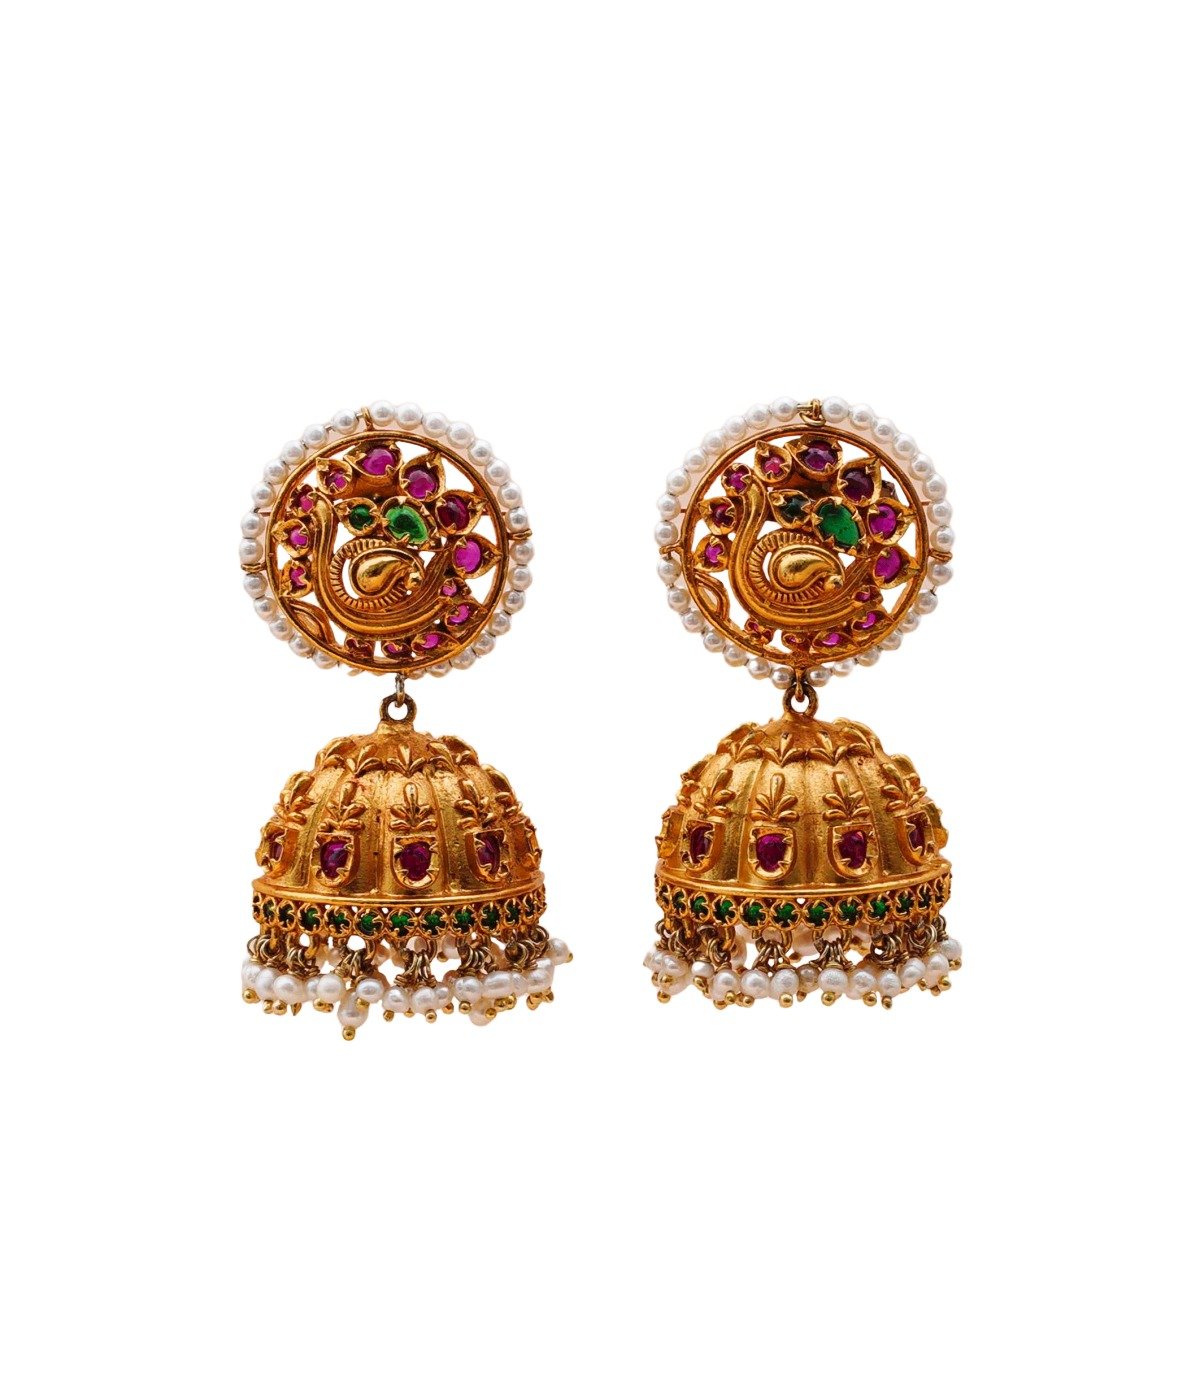 92.5 SILVER GOLD POLISHED GREEN AND PINK STONE STUDDED JHUMKI WITH WHITE BEADS